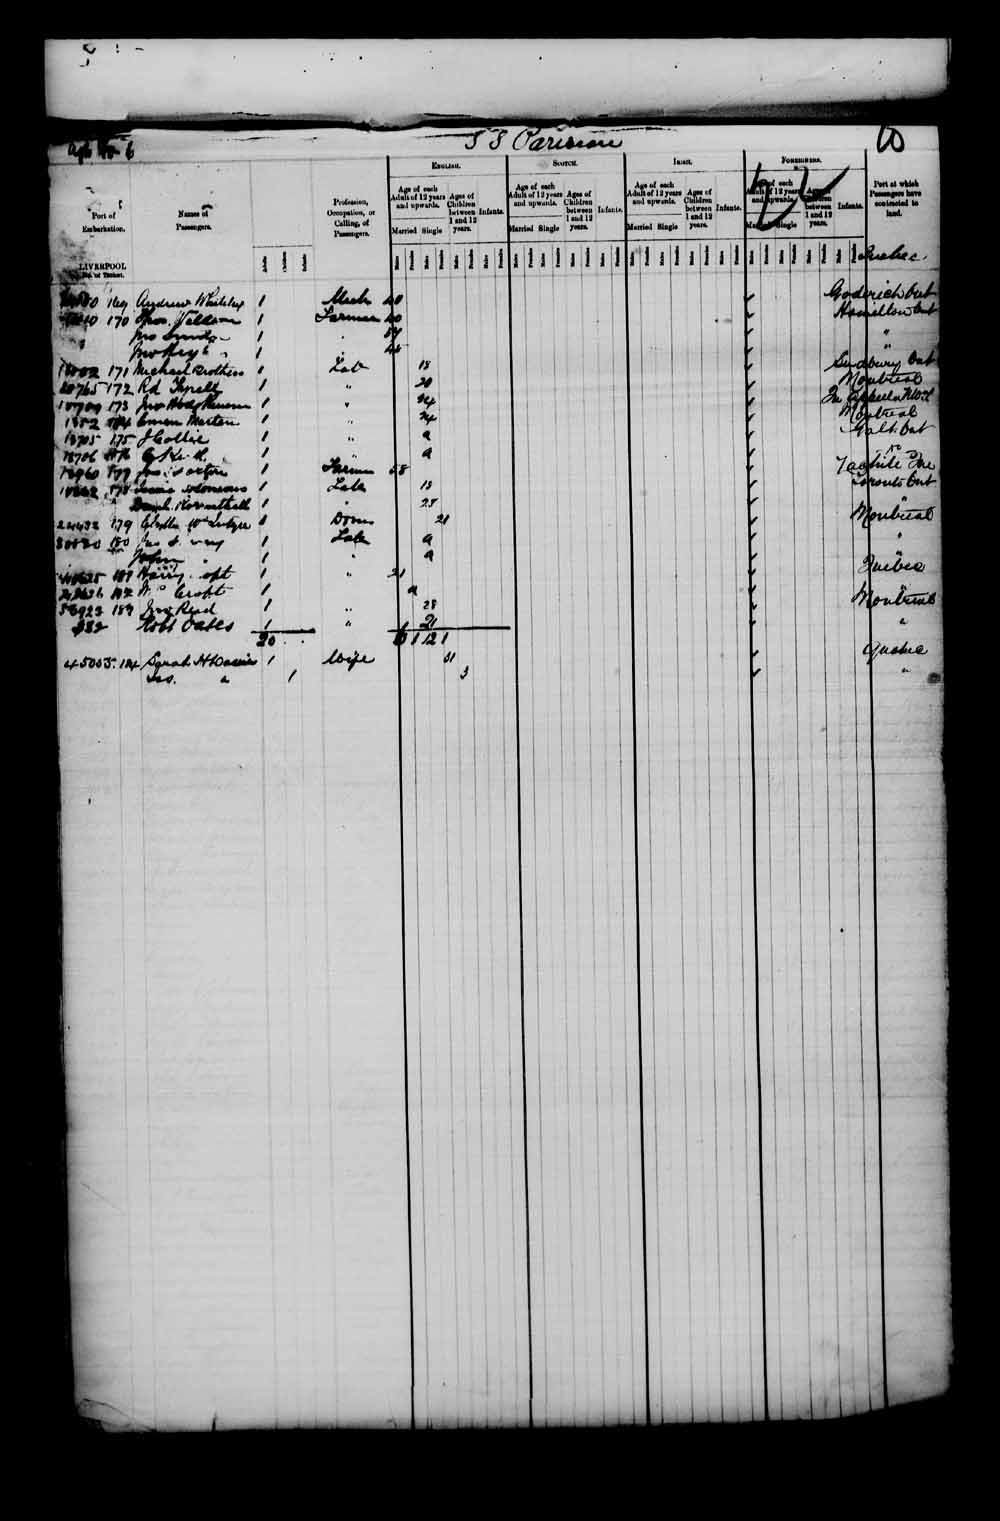 Digitized page of Passenger Lists for Image No.: e003549671